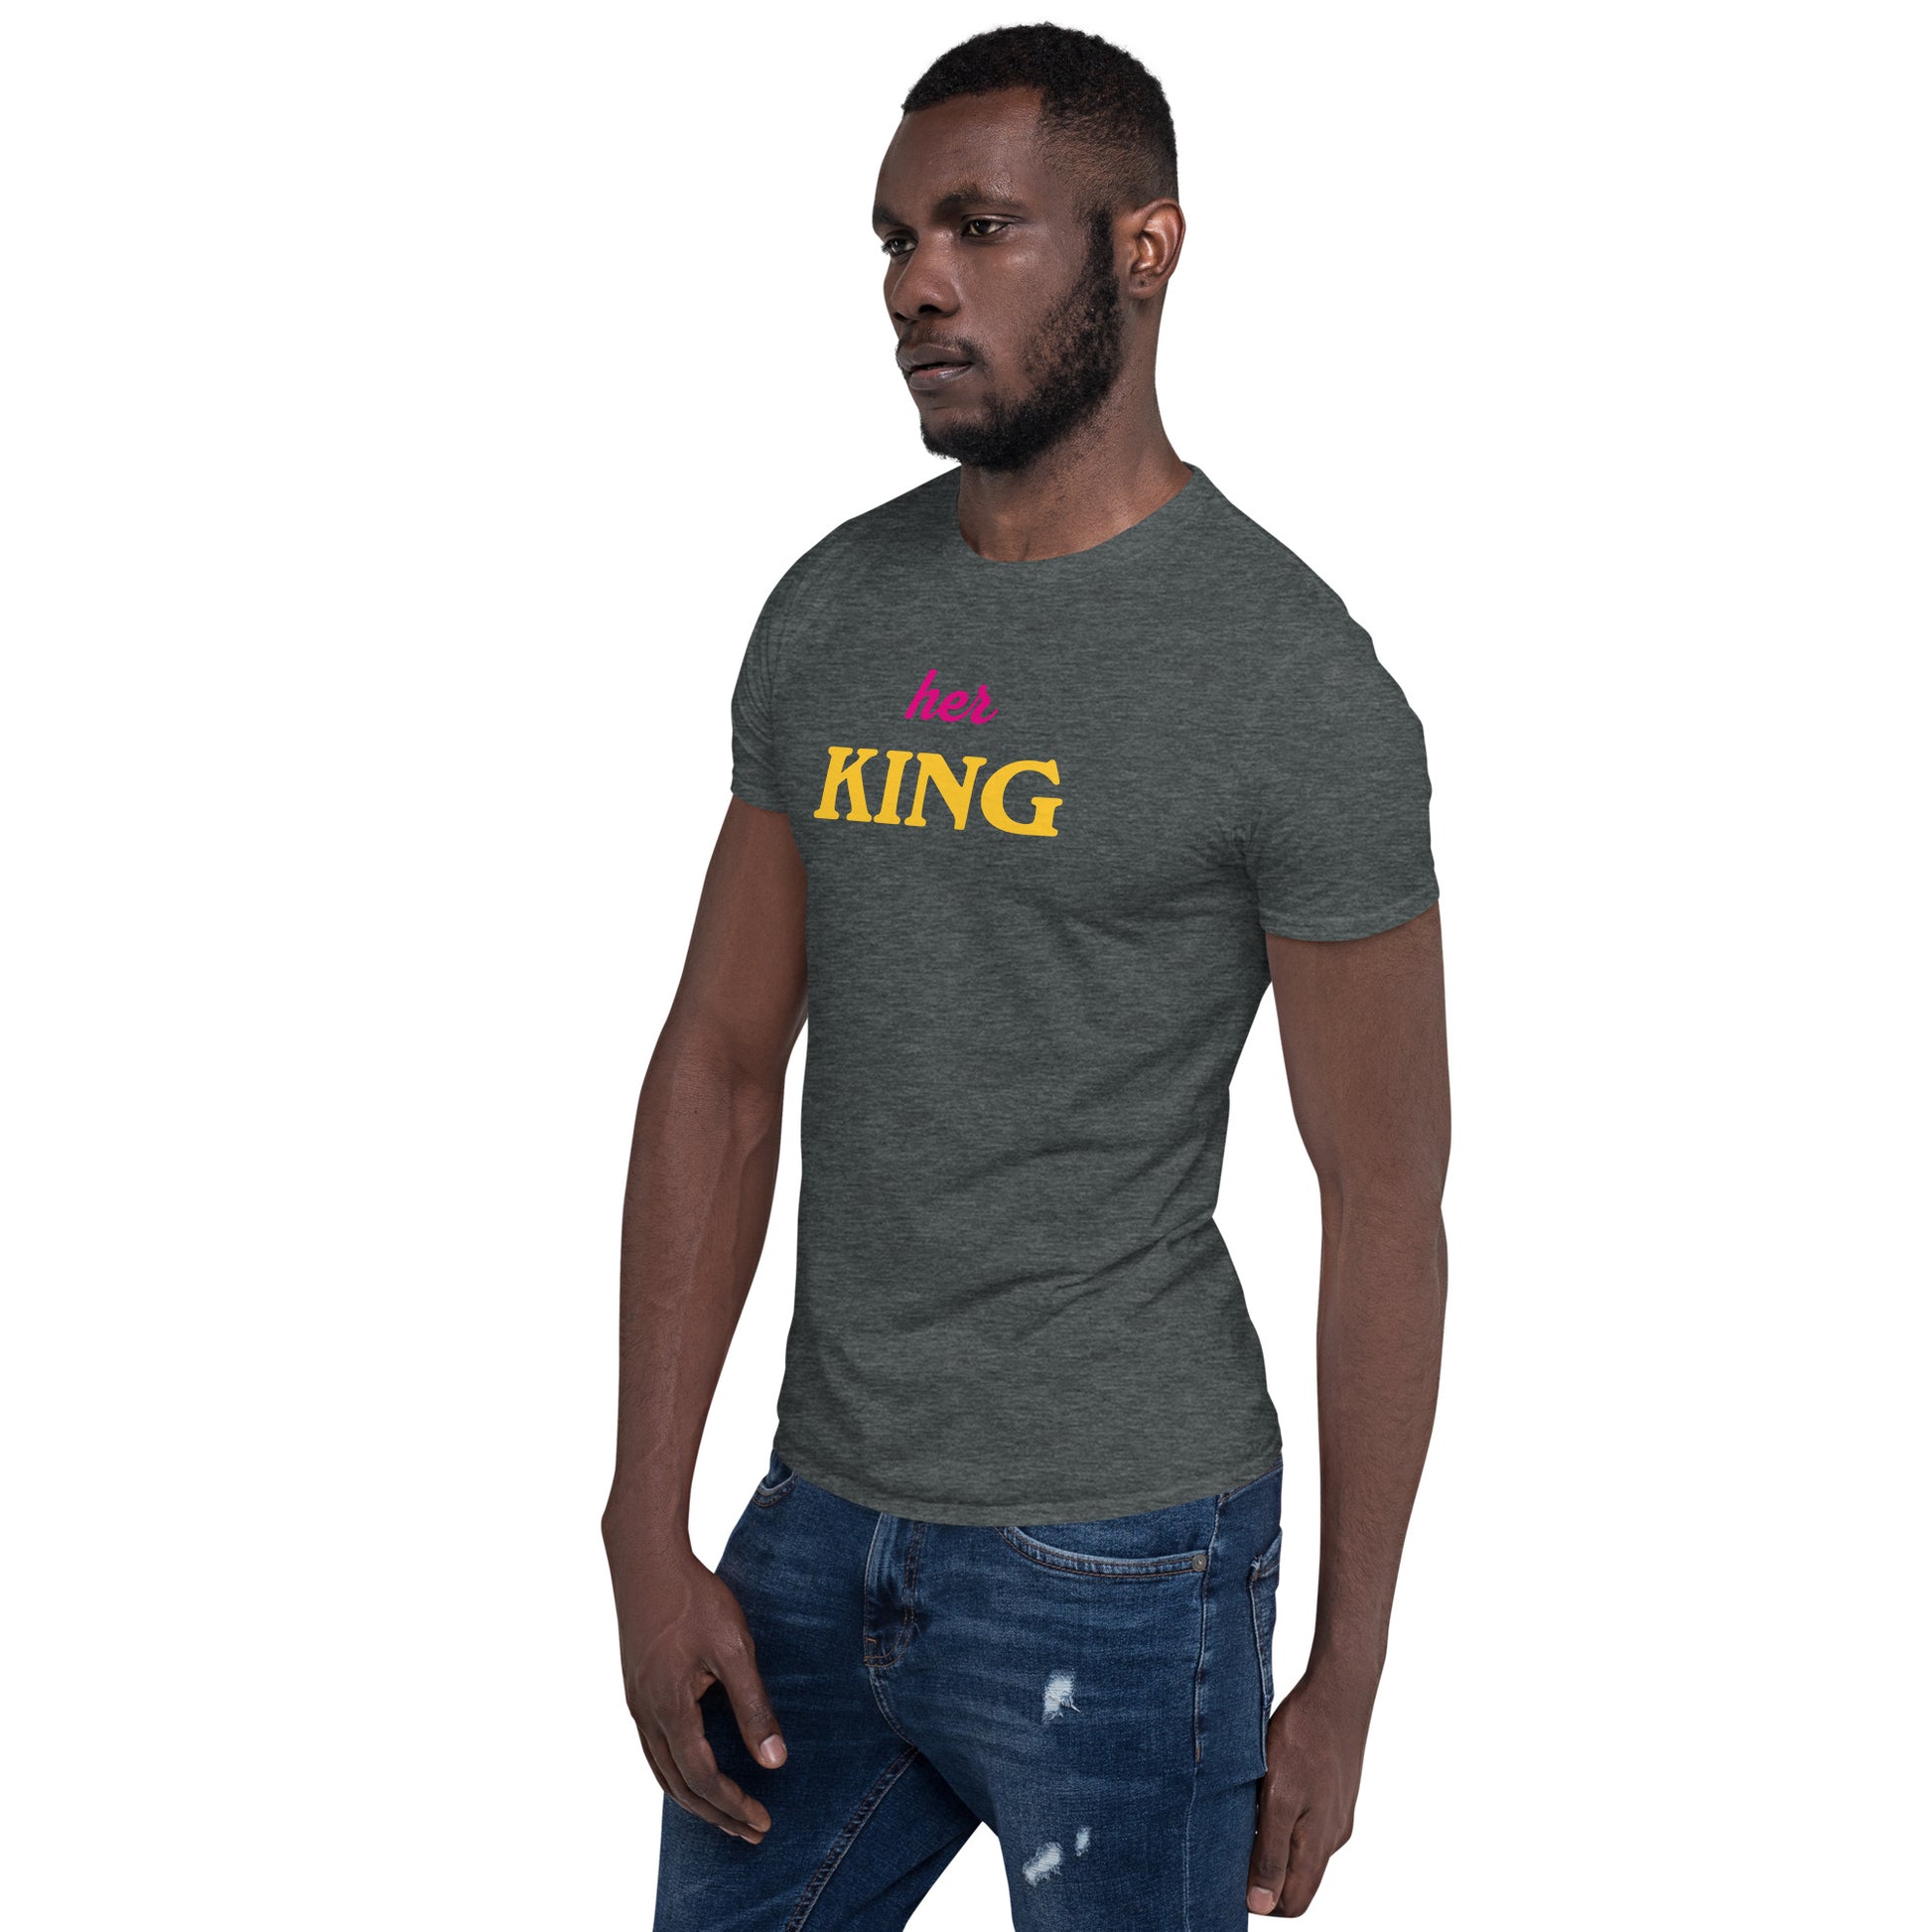 Her King Softstyle T-Shirt heather turn